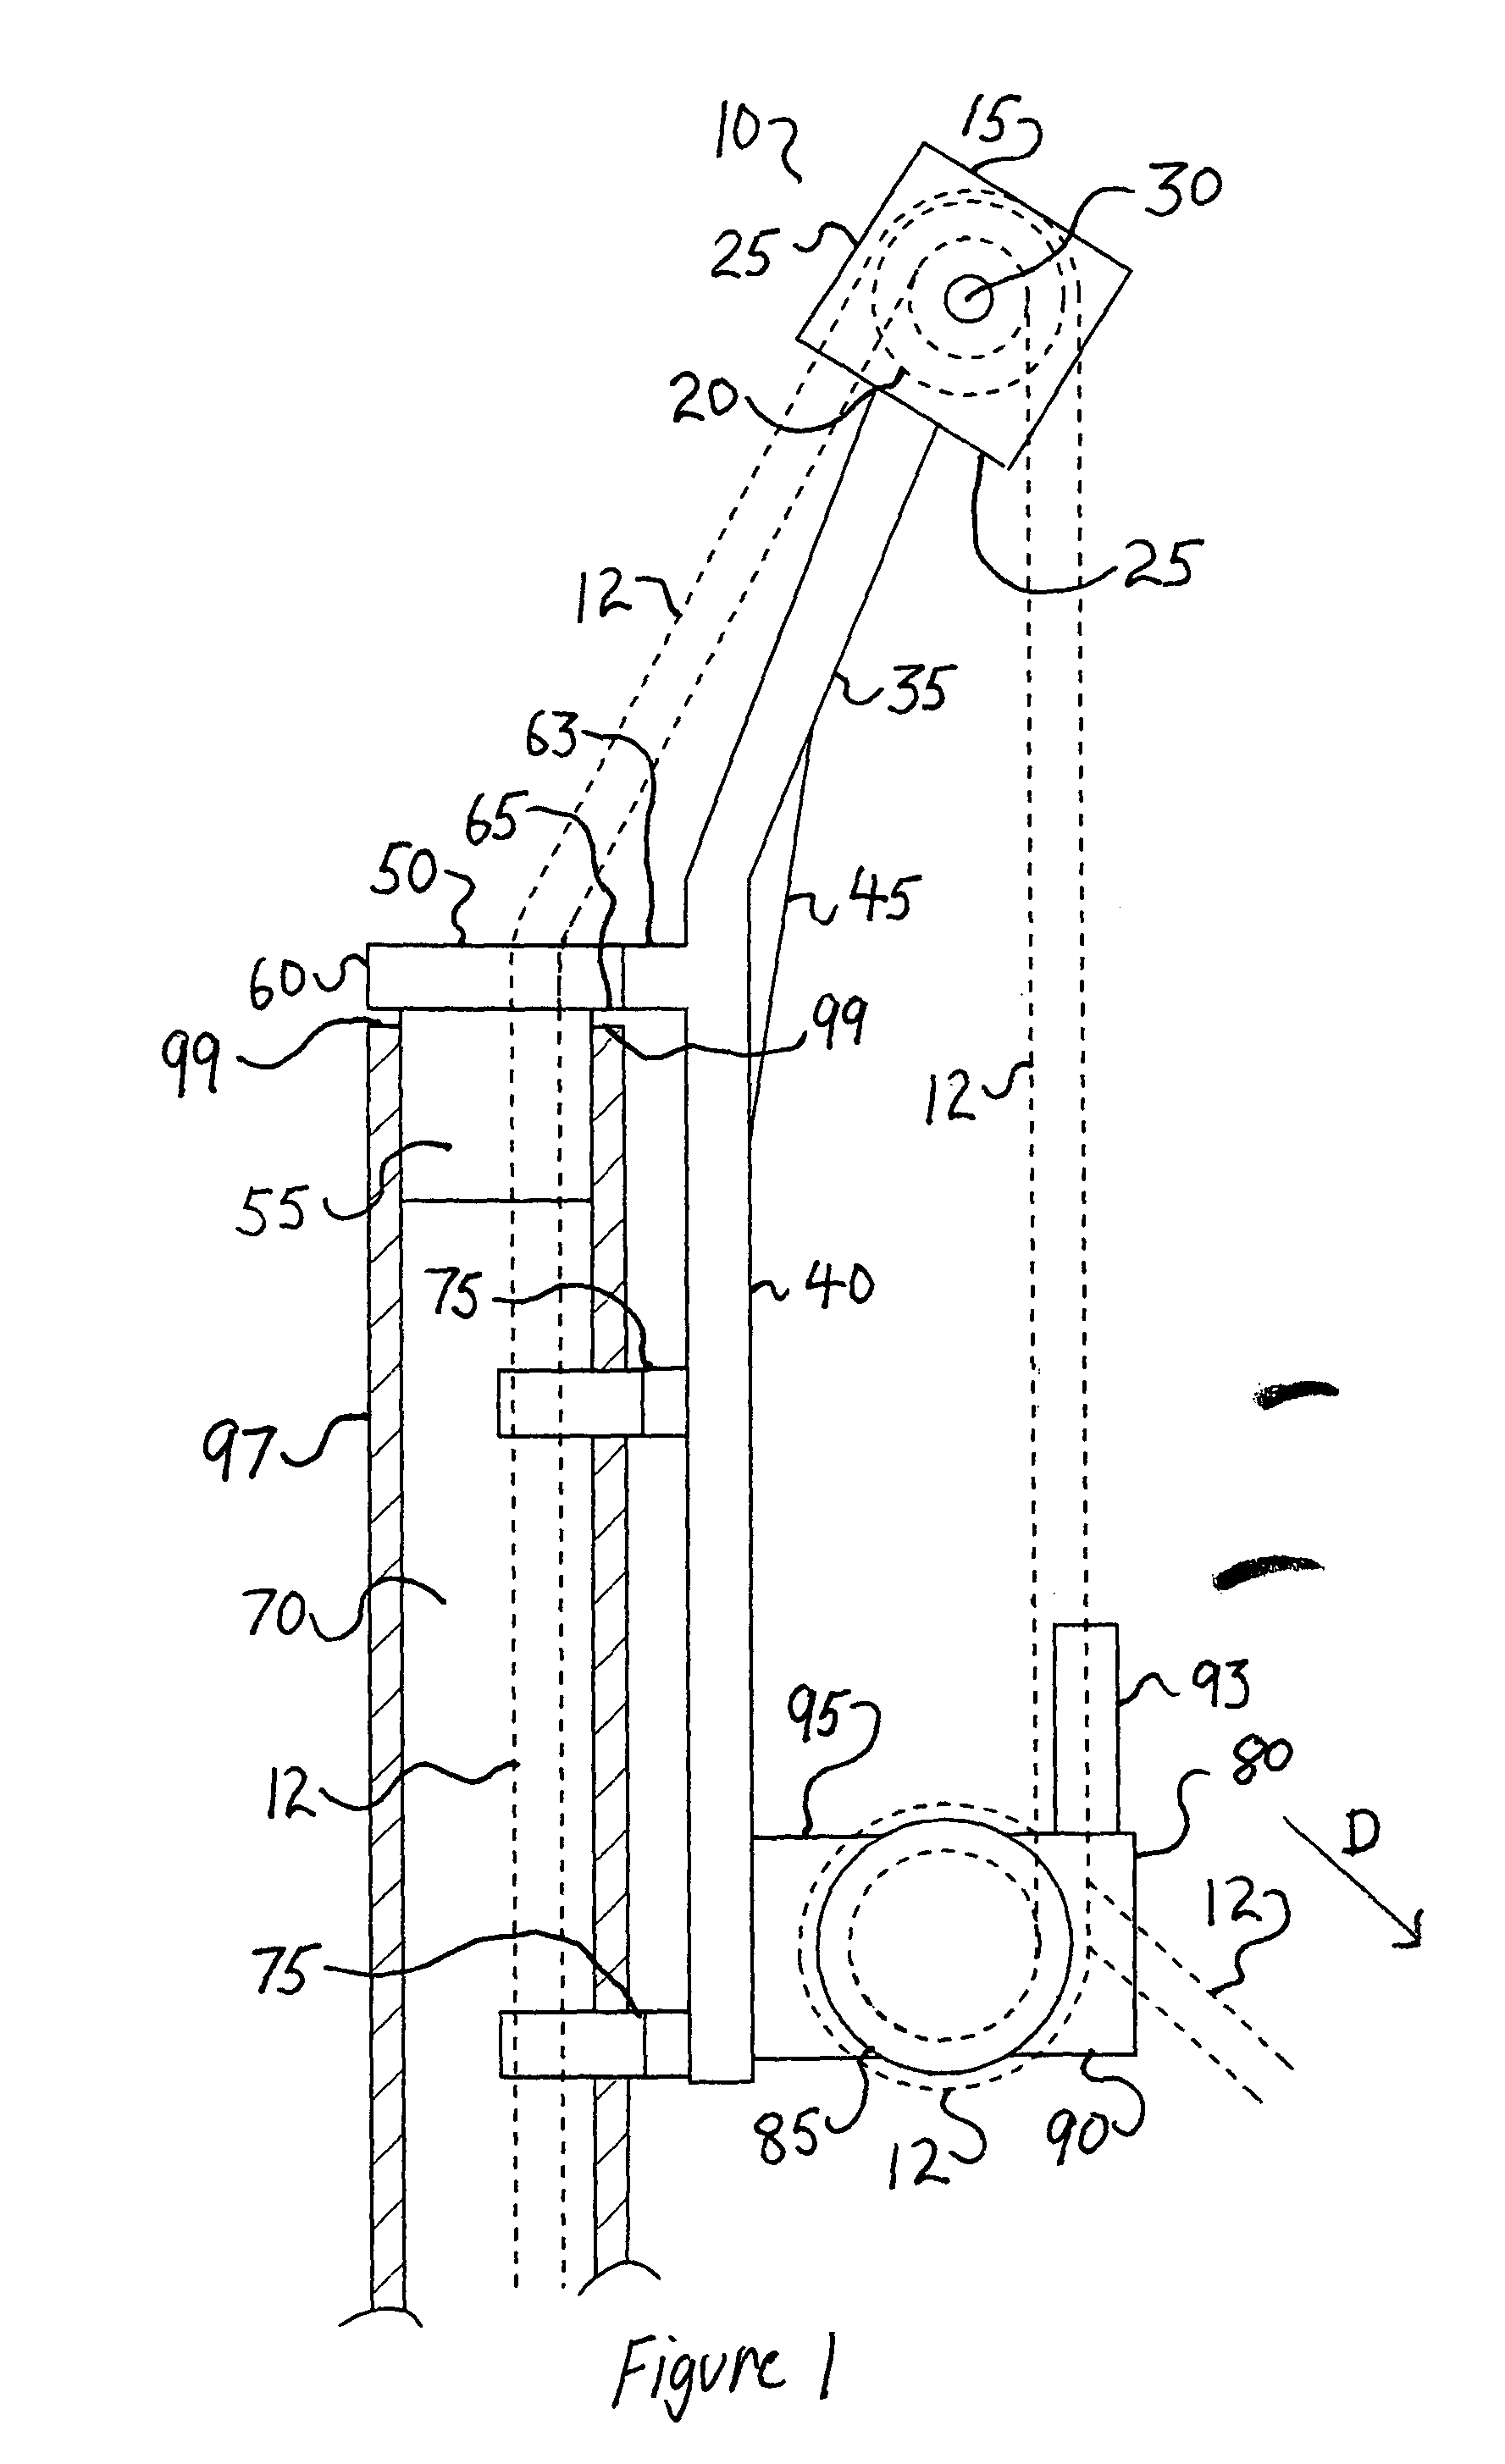 Machine for pulling wire through a conduit